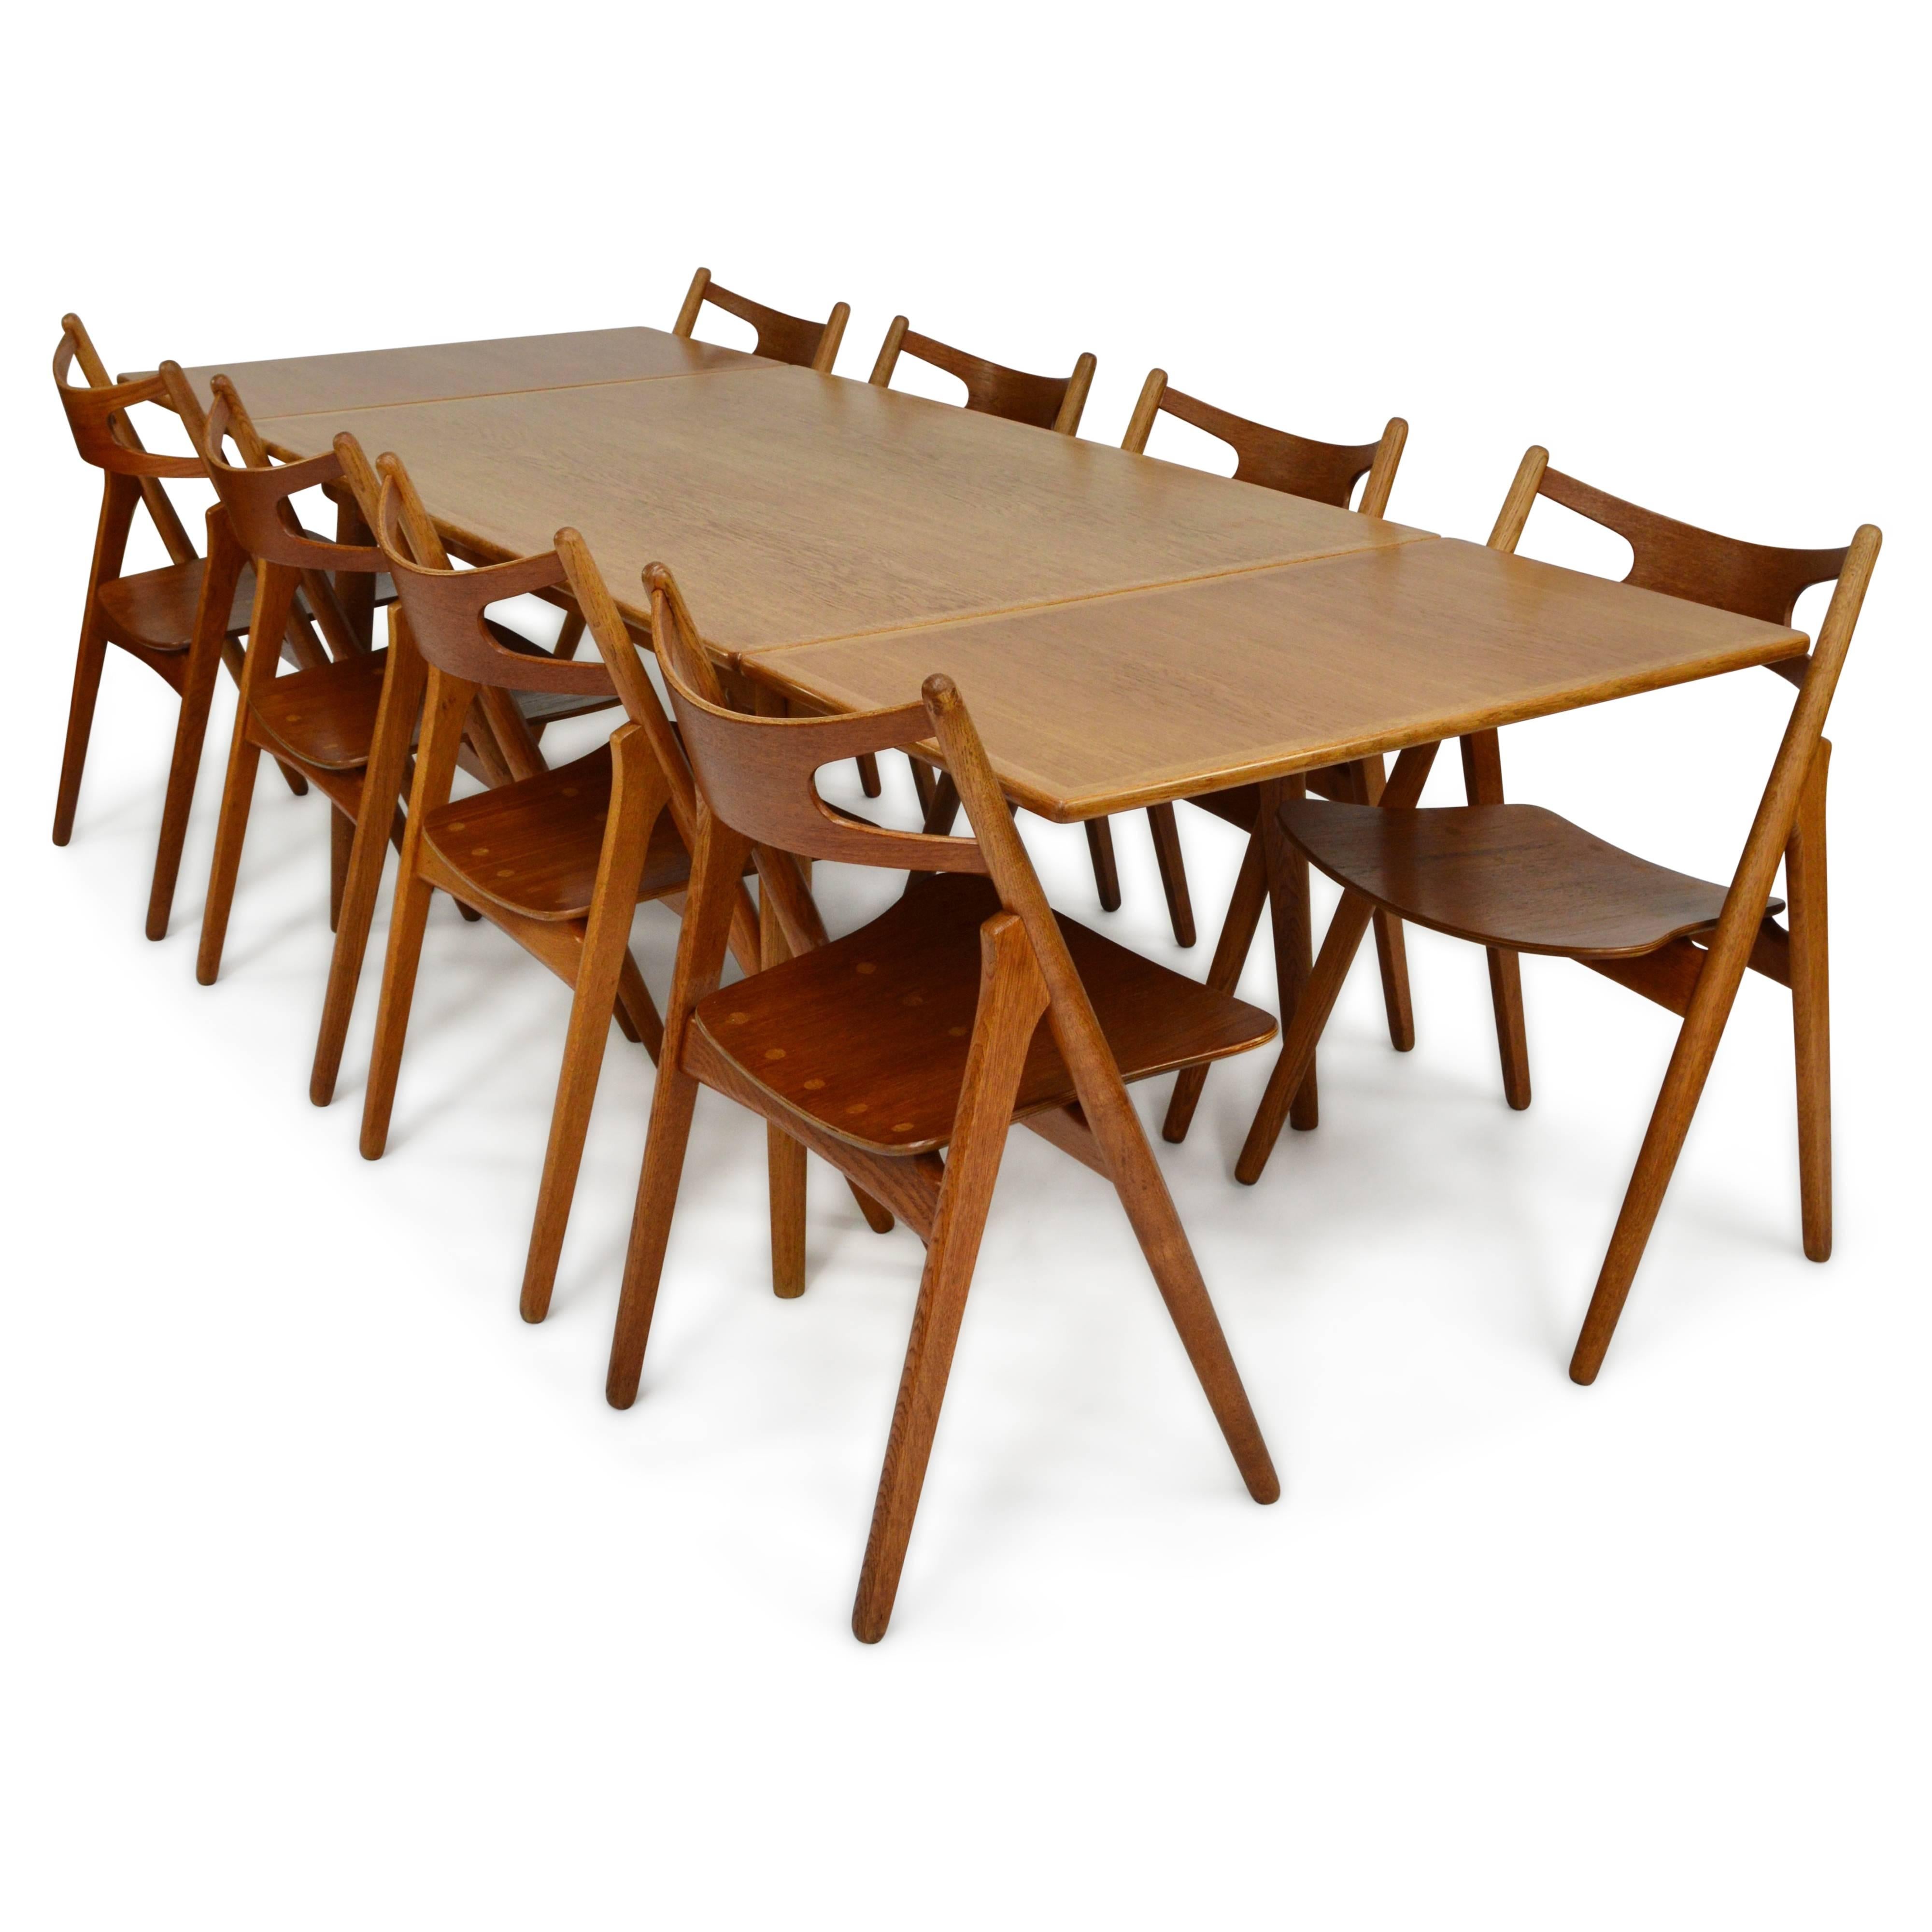 Rare AT-312 dining table and CH29 Sawbuck dining chairs by Hans J. Wegner. The table and chairs have been completely refinished with a multilayer hardwax oil, back to it’s original look. They are made of Oak and Teak.
In excellent restored